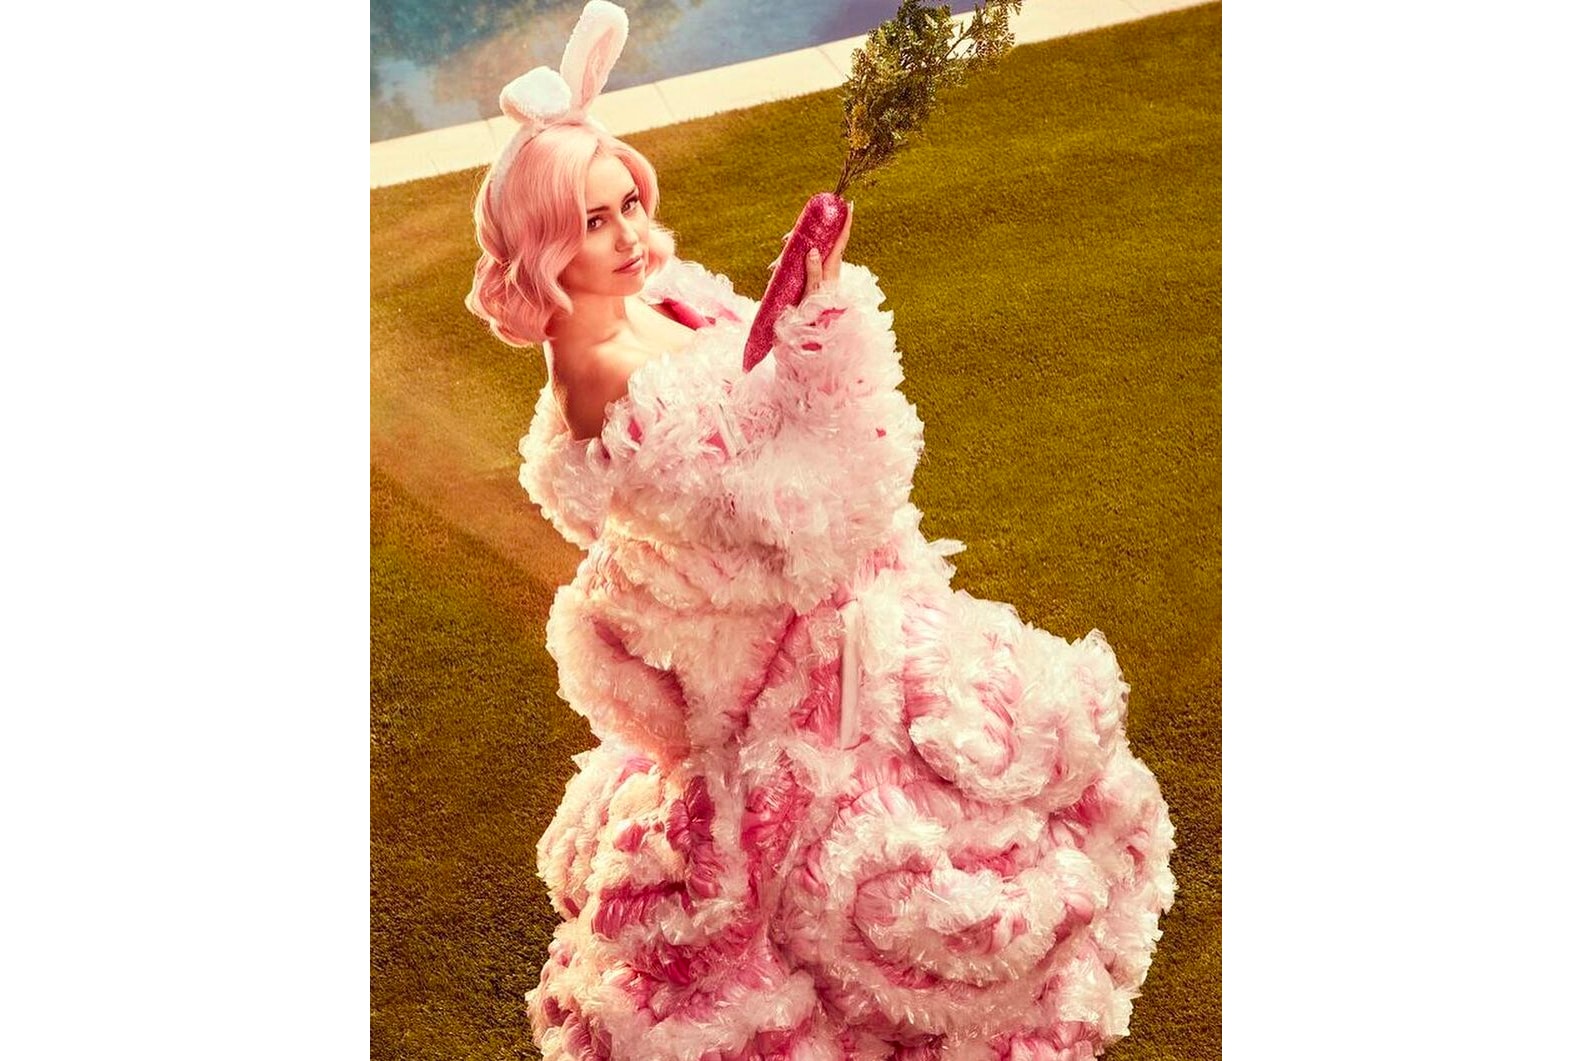 Miley Cyrus Easter 2018 Editorial Videos Photoshoot Pink Pastel Eggs Bunny Instagram